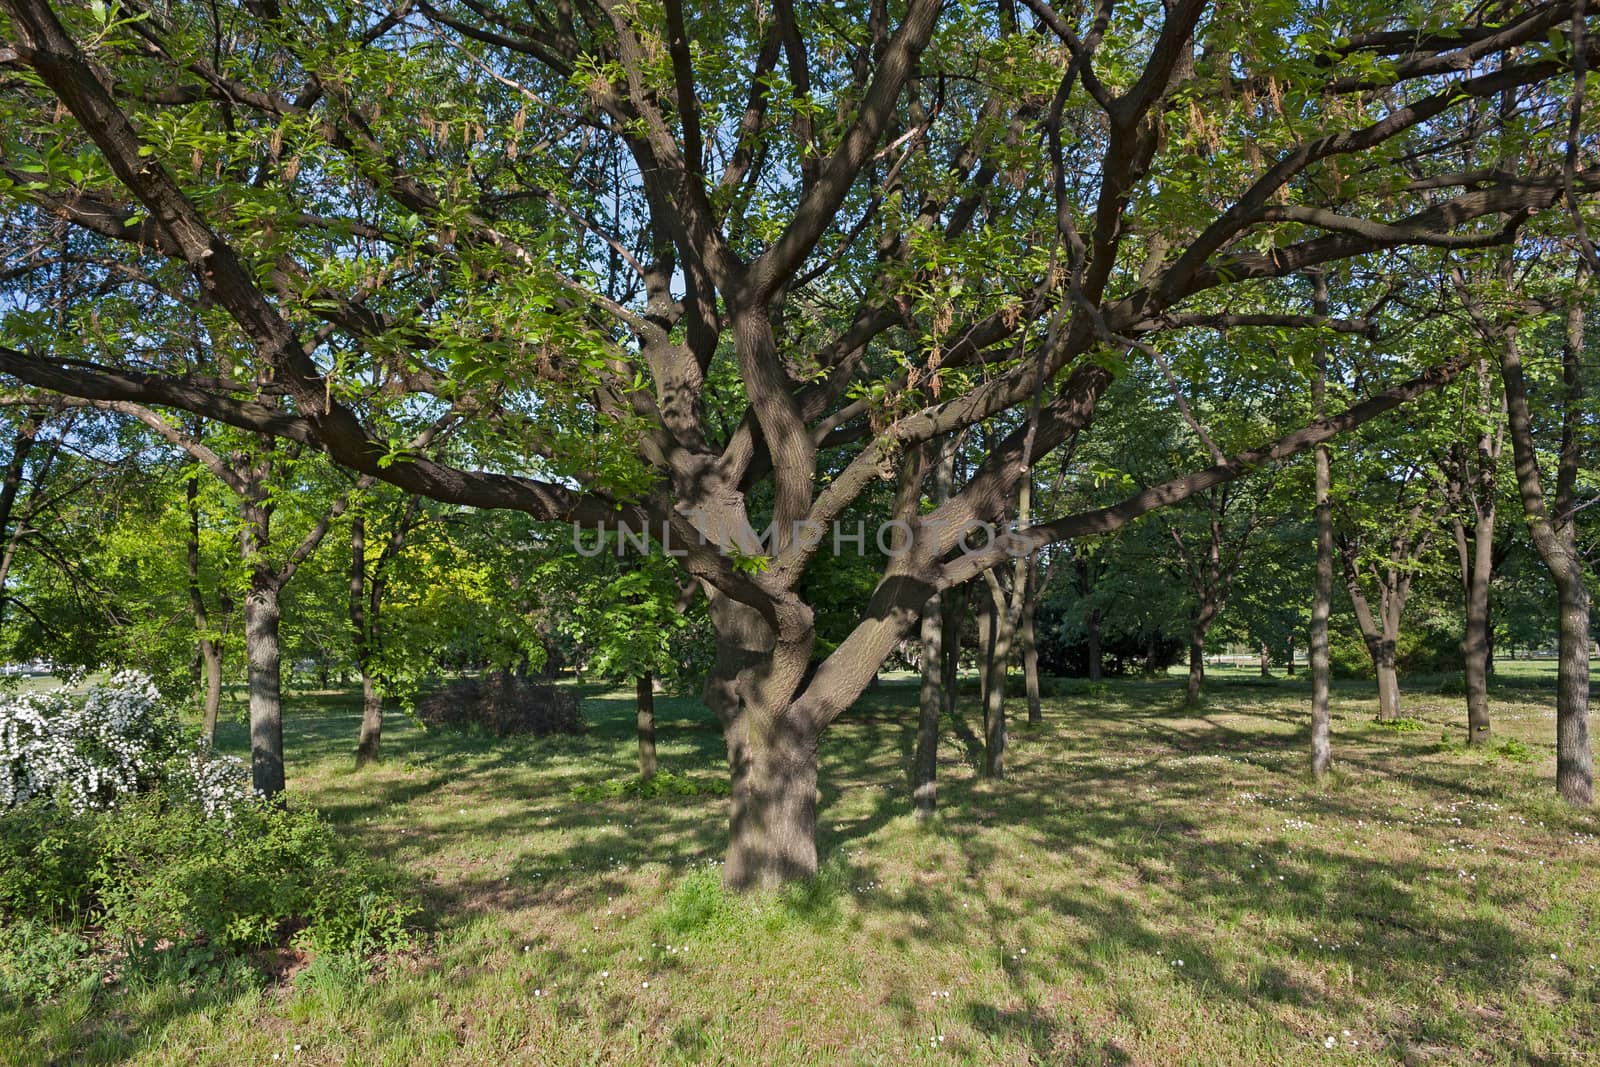 Old tree with big branches, situated in the park, giving light shadow.